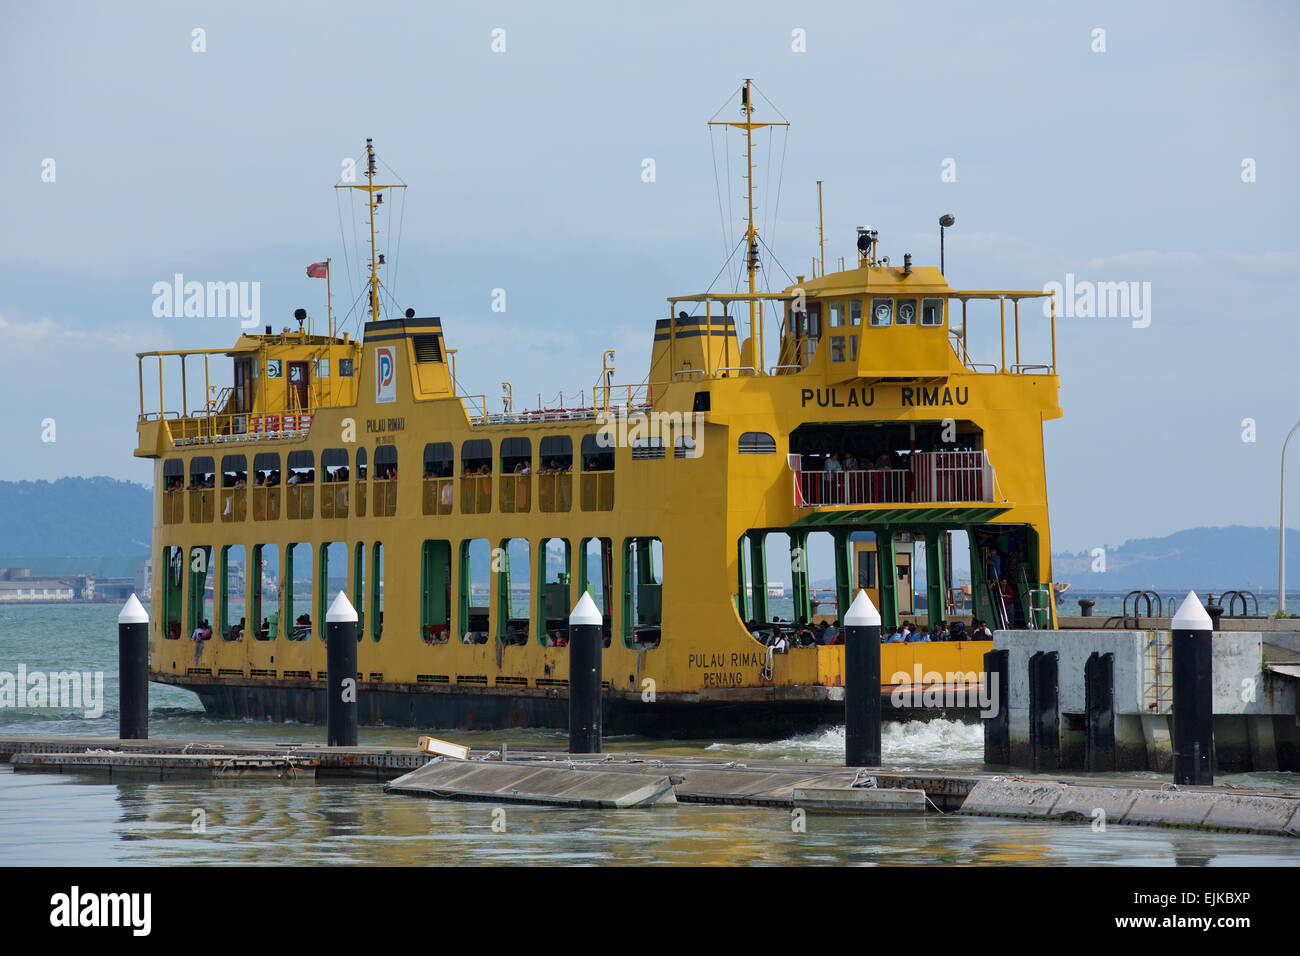 The Pulau Rimau one of the fleet of car and passenger ferries operating between Georgetown on Penang Island and Butterworth. Stock Photo